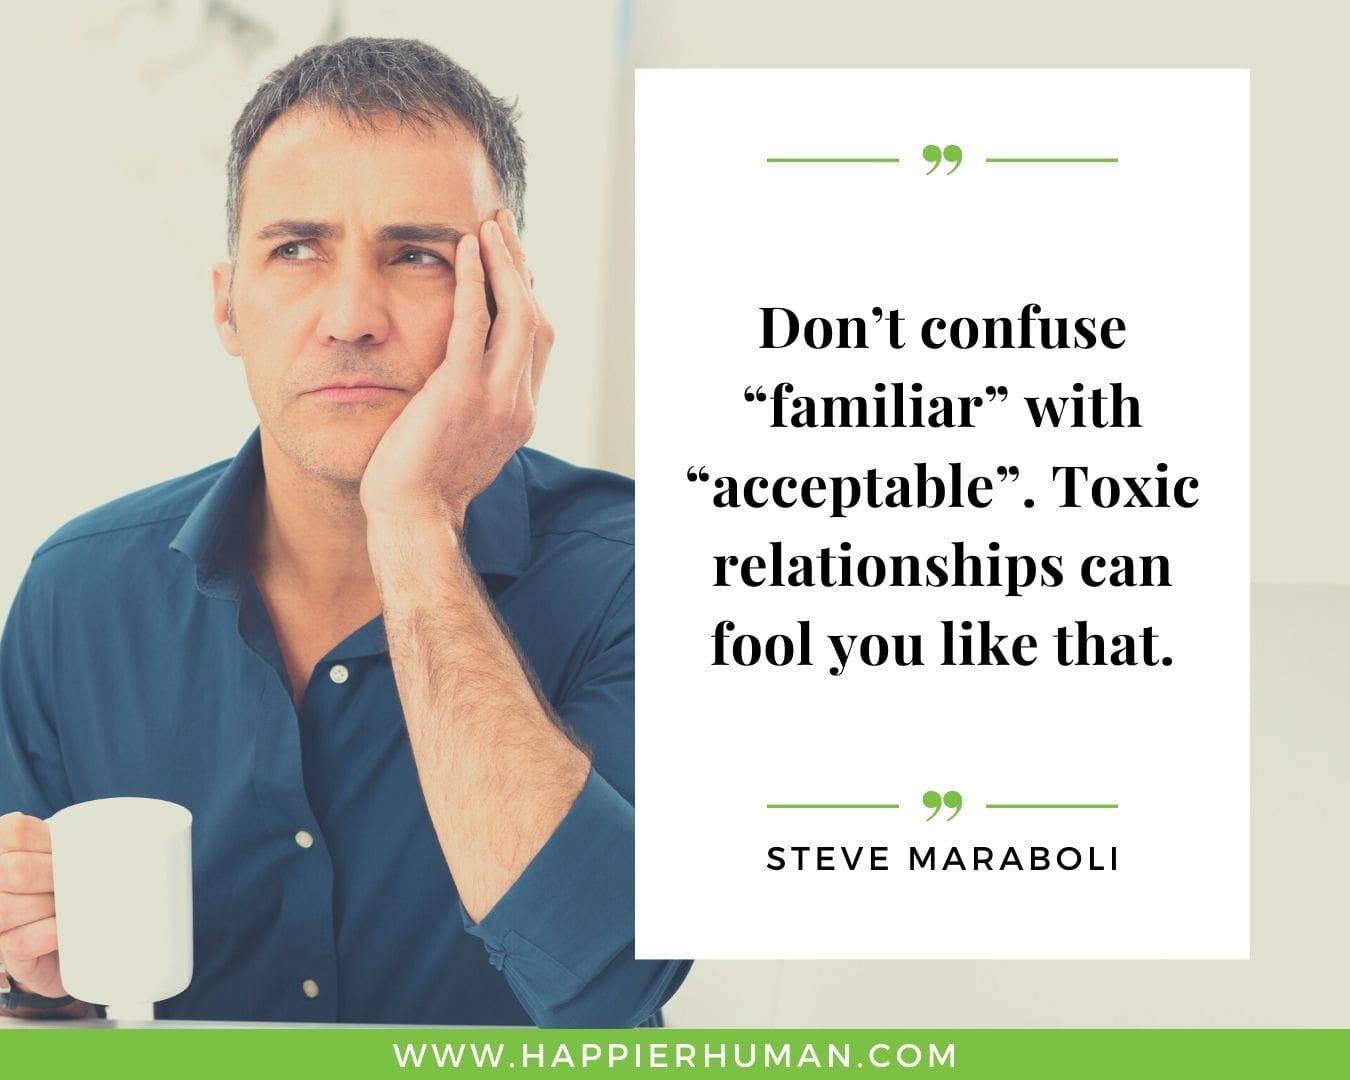 Toxic People Quotes - “Don’t confuse “familiar” with “acceptable”. Toxic relationships can fool you like that.” – Steve Maraboli